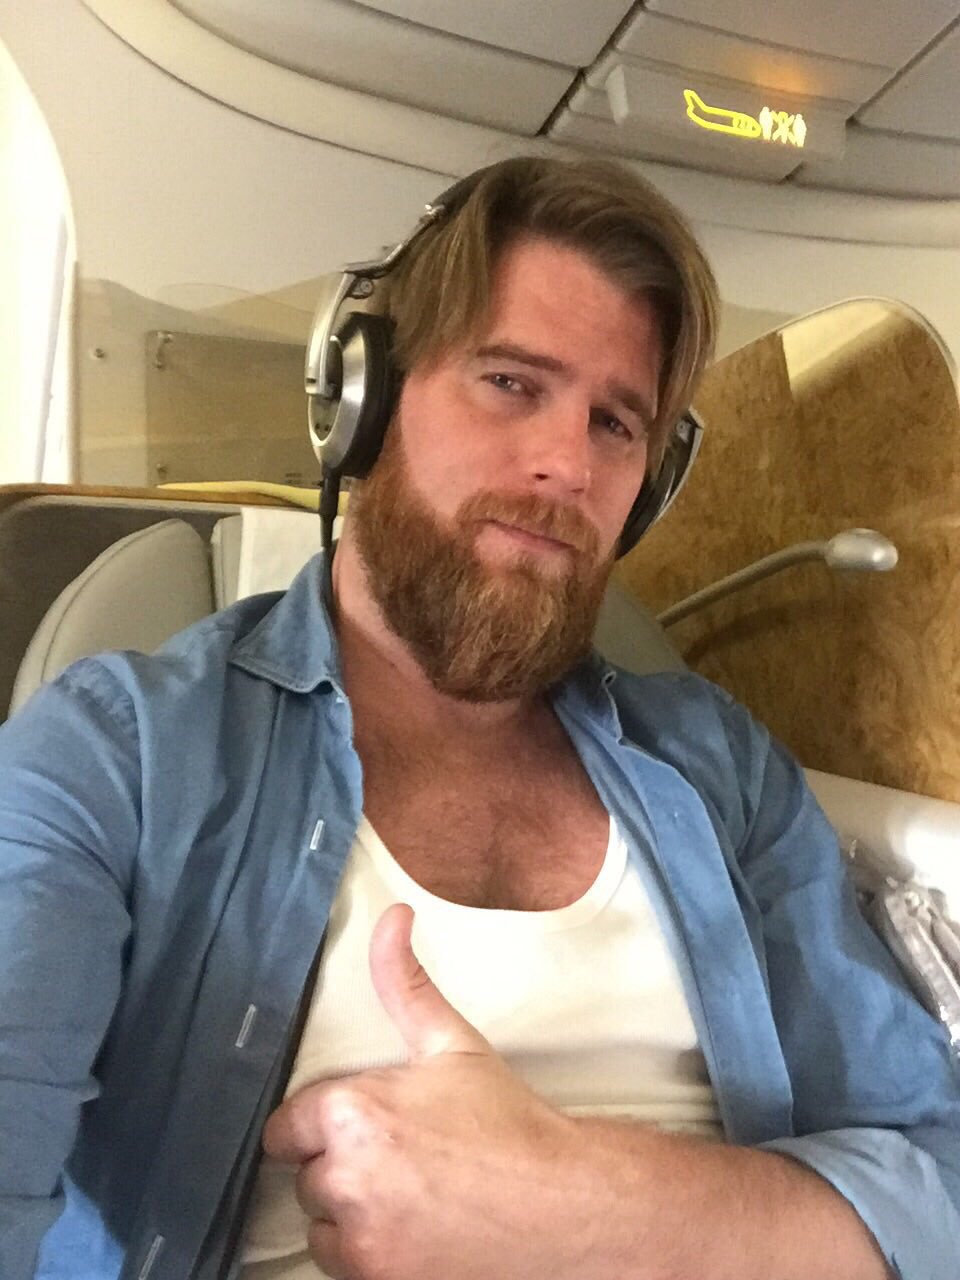 BassHunter on Twitter: "On my way to Sweden 🇸🇪 today for Christmas and shows 👌⛄️ https://t.co/D4PK1Ravnu" / Twitter